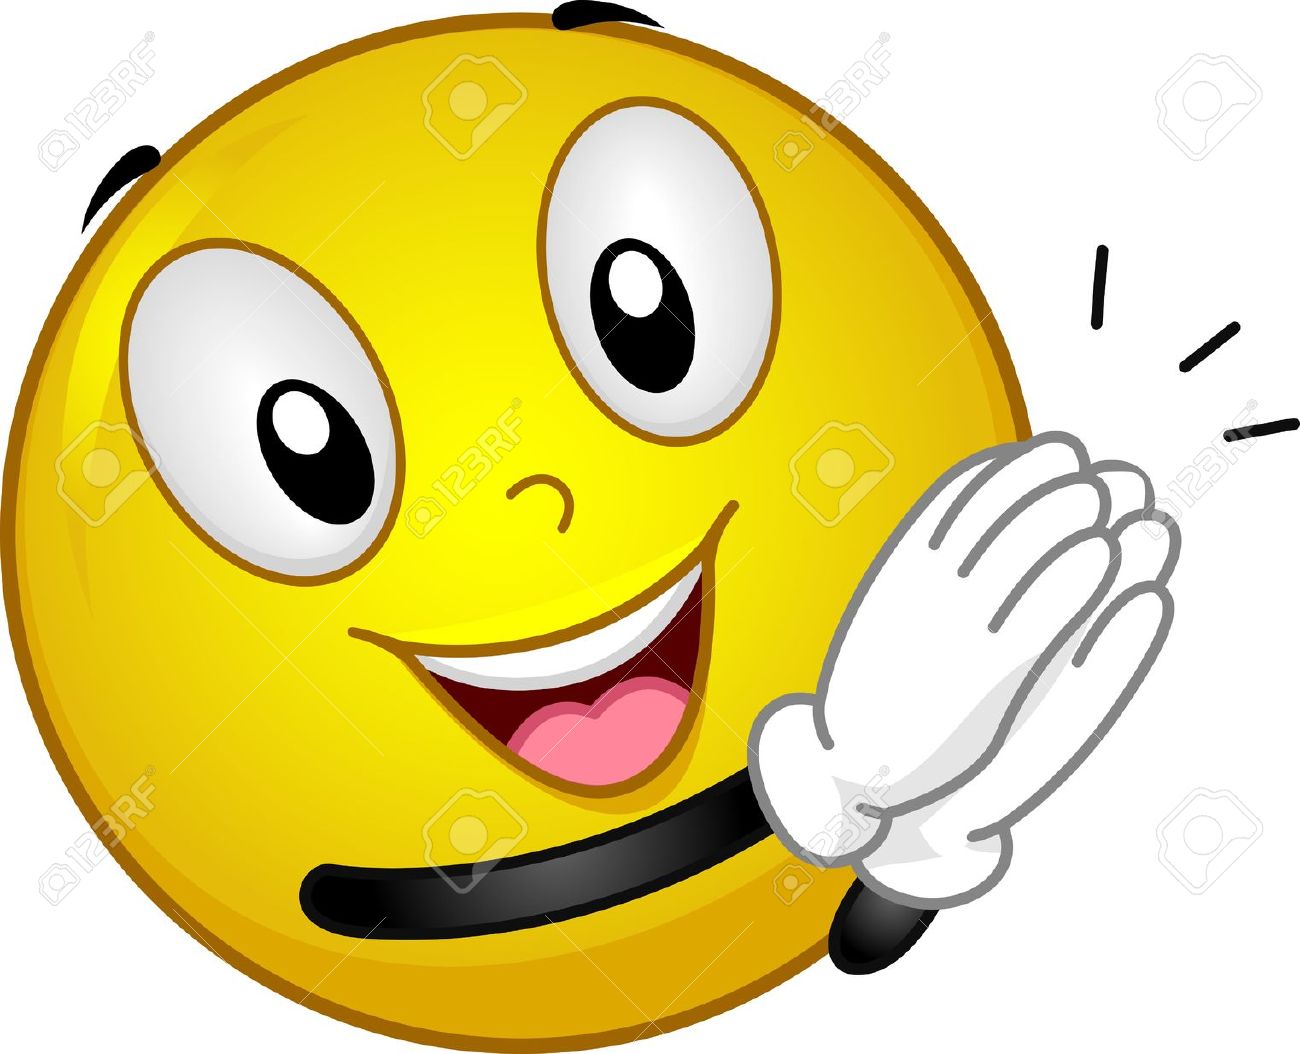 14343652-Illustration-Featuring-a-Clapping-Smiley-Stock-Illustration-emoticons